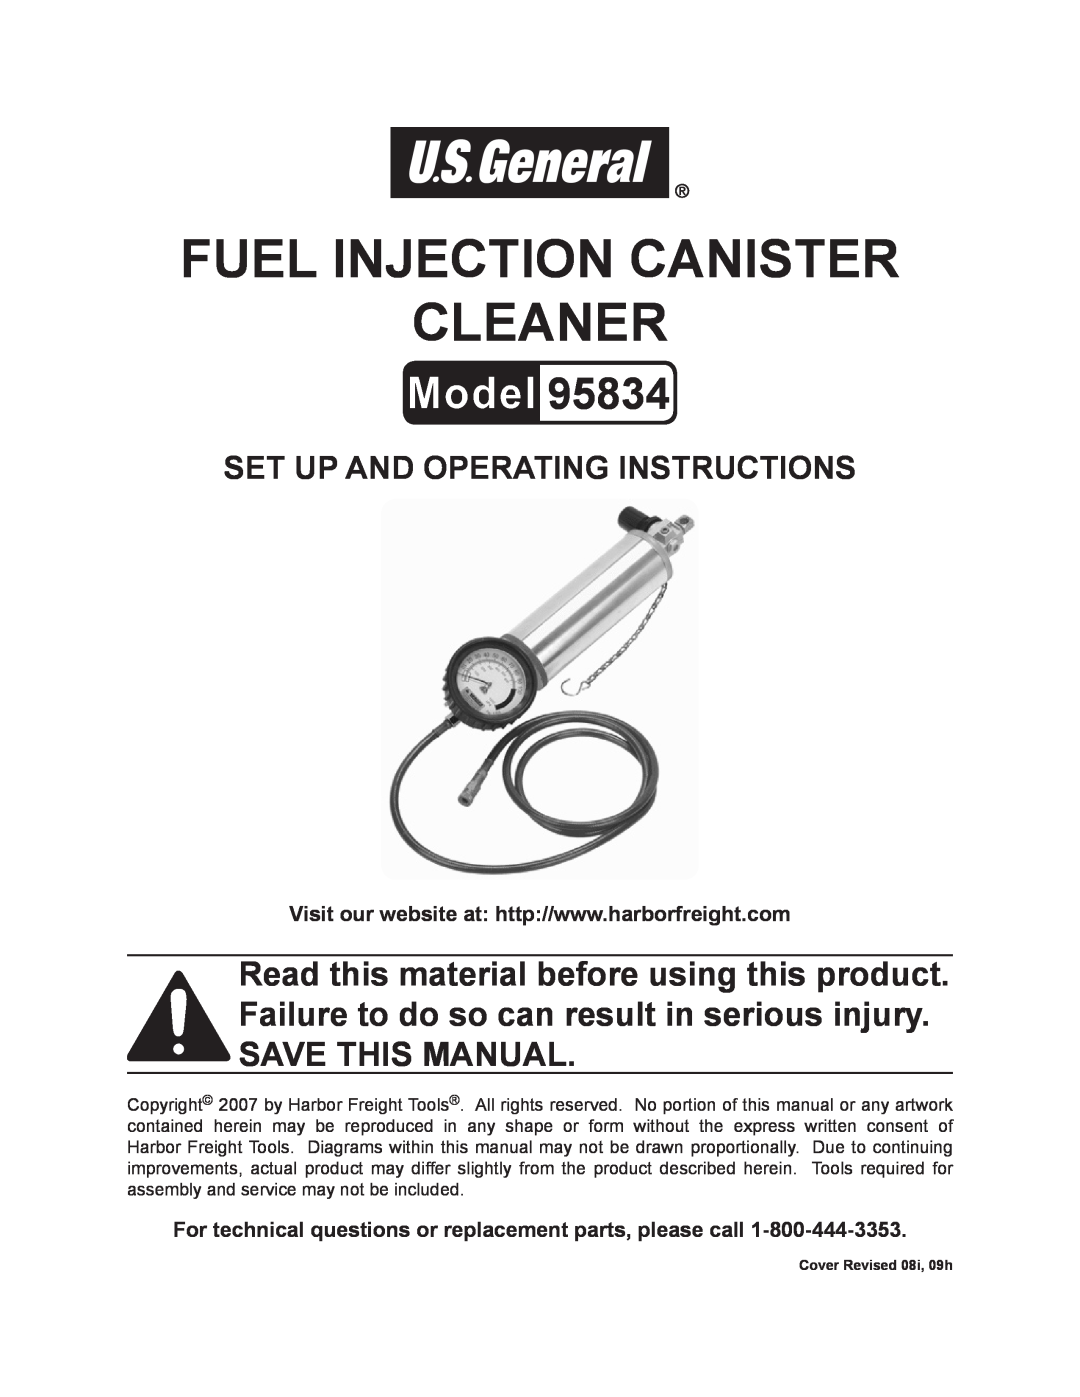 Harbor Freight Tools 95834 operating instructions FUEL Injection CANISTER CLEANER, Set up and Operating Instructions 